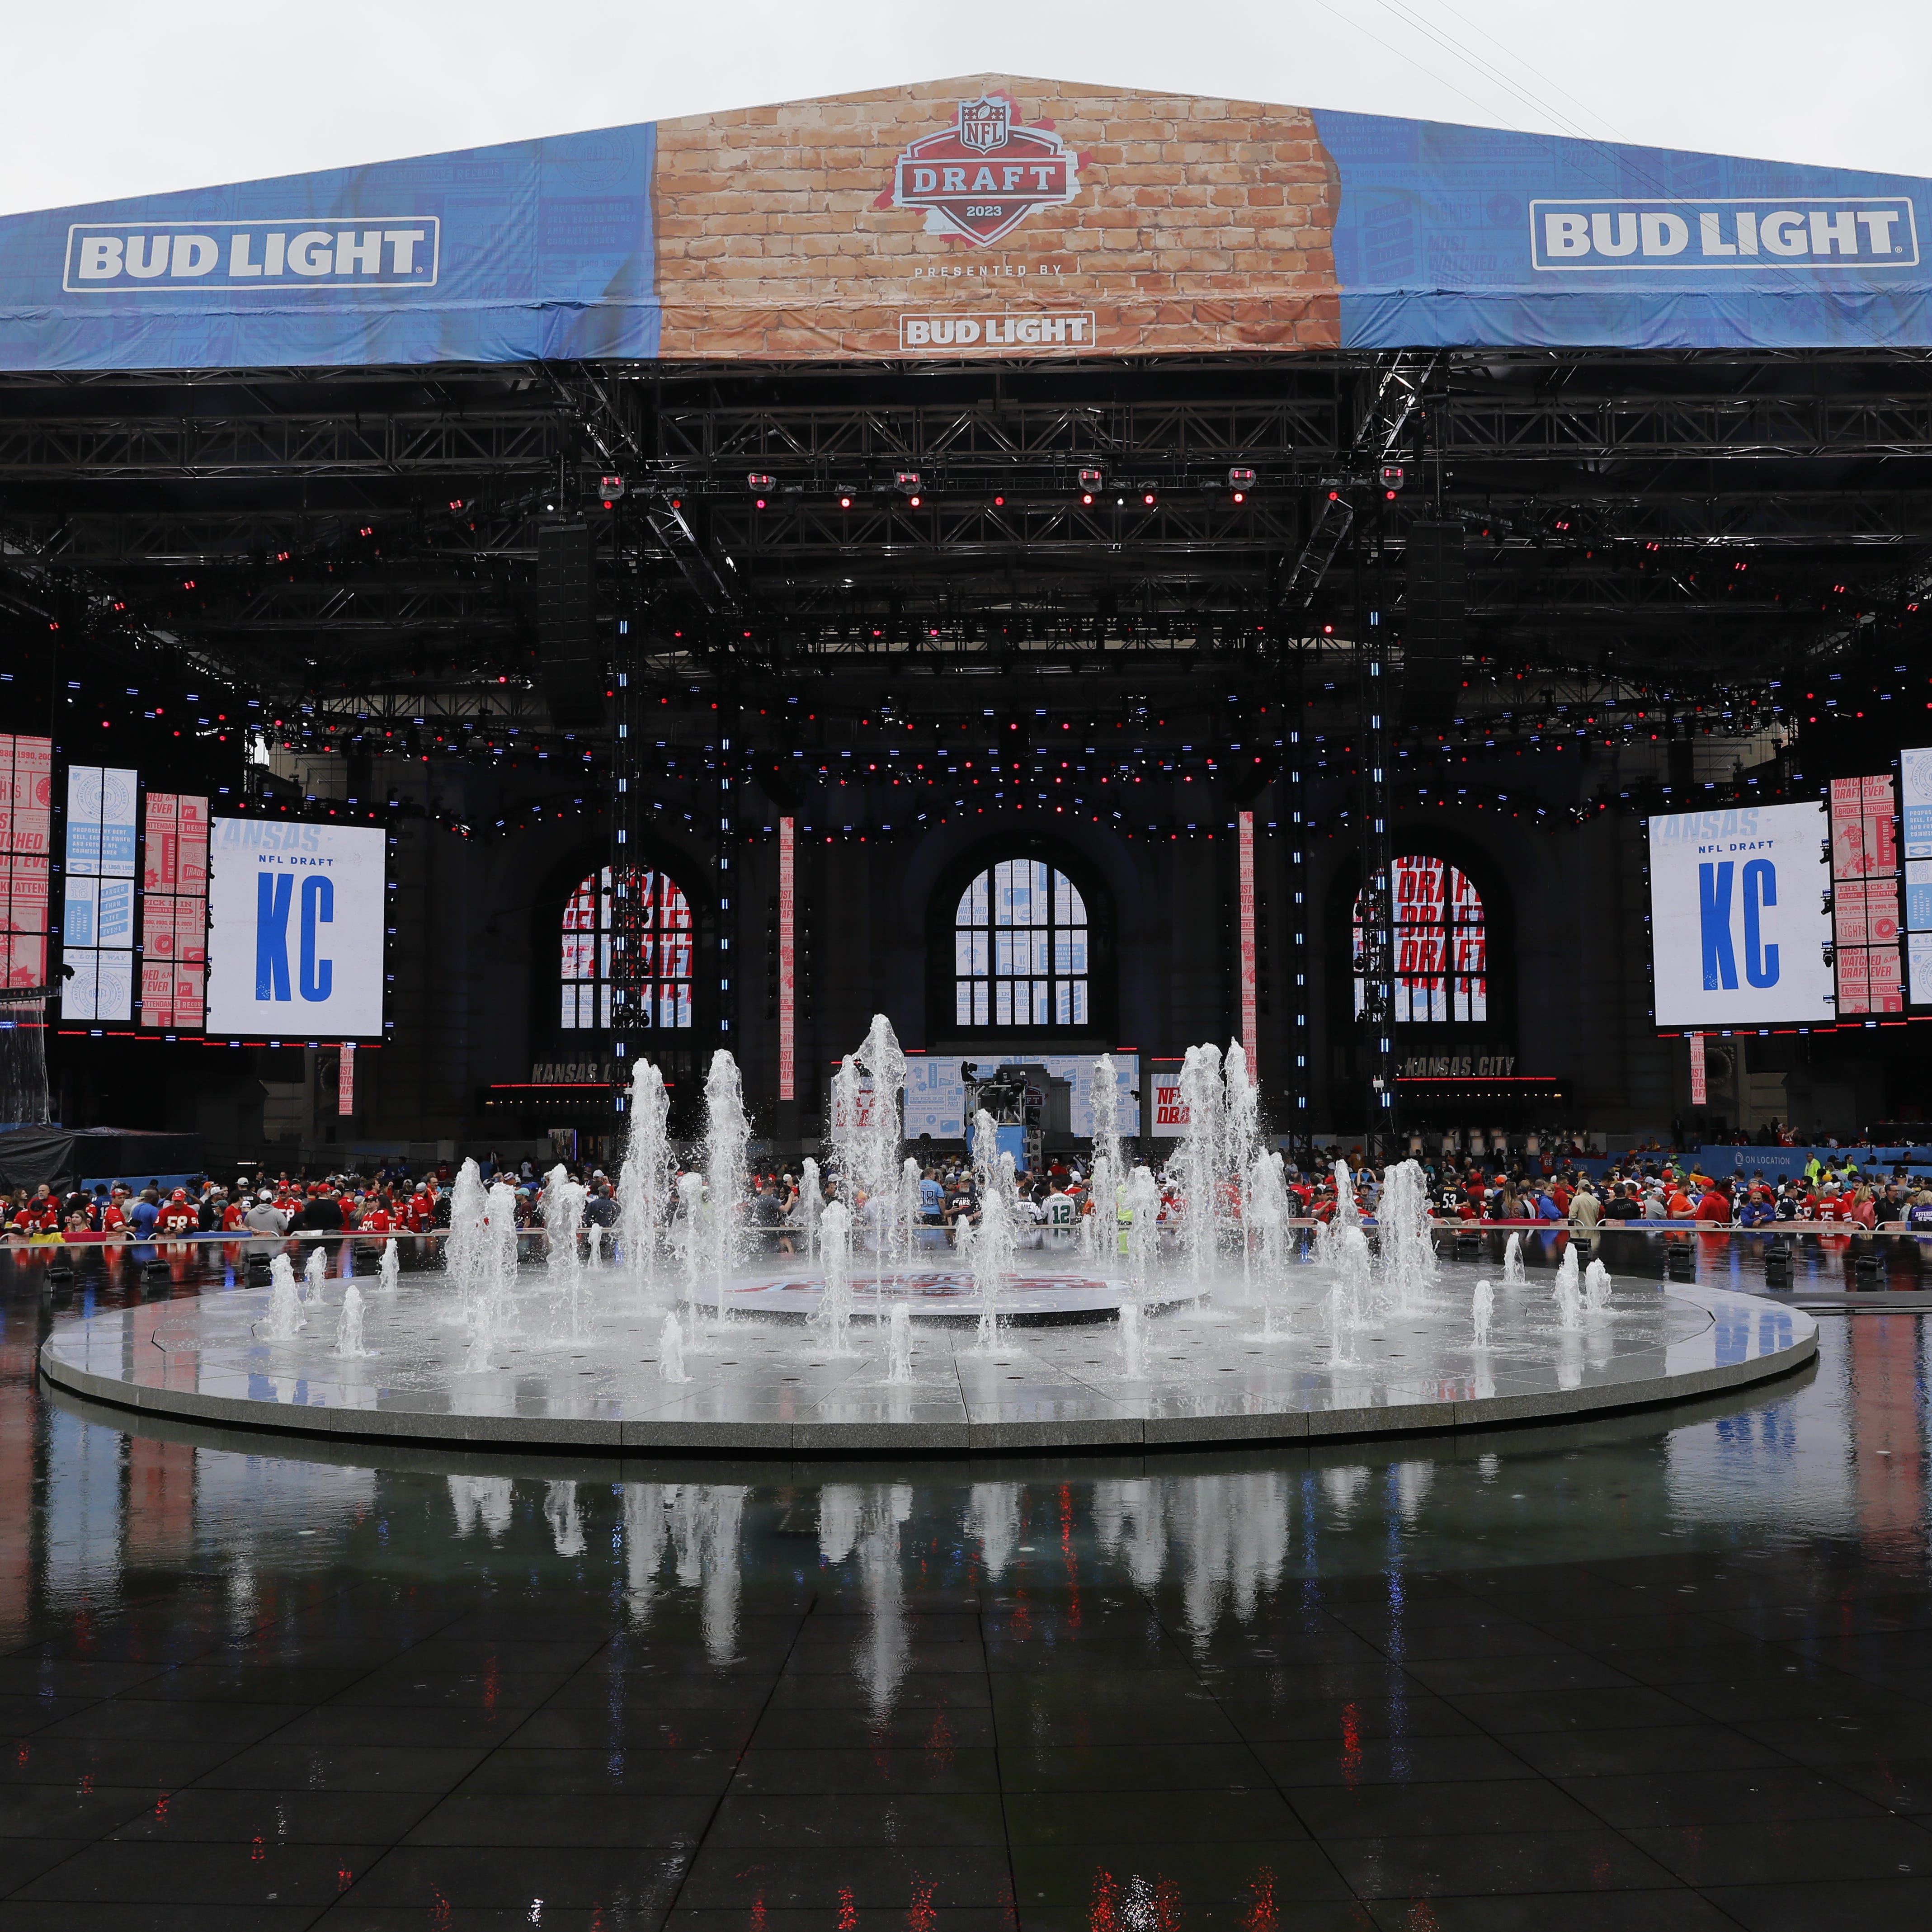 The NFL Draft Theater stage prior to Rounds 2 and 3.